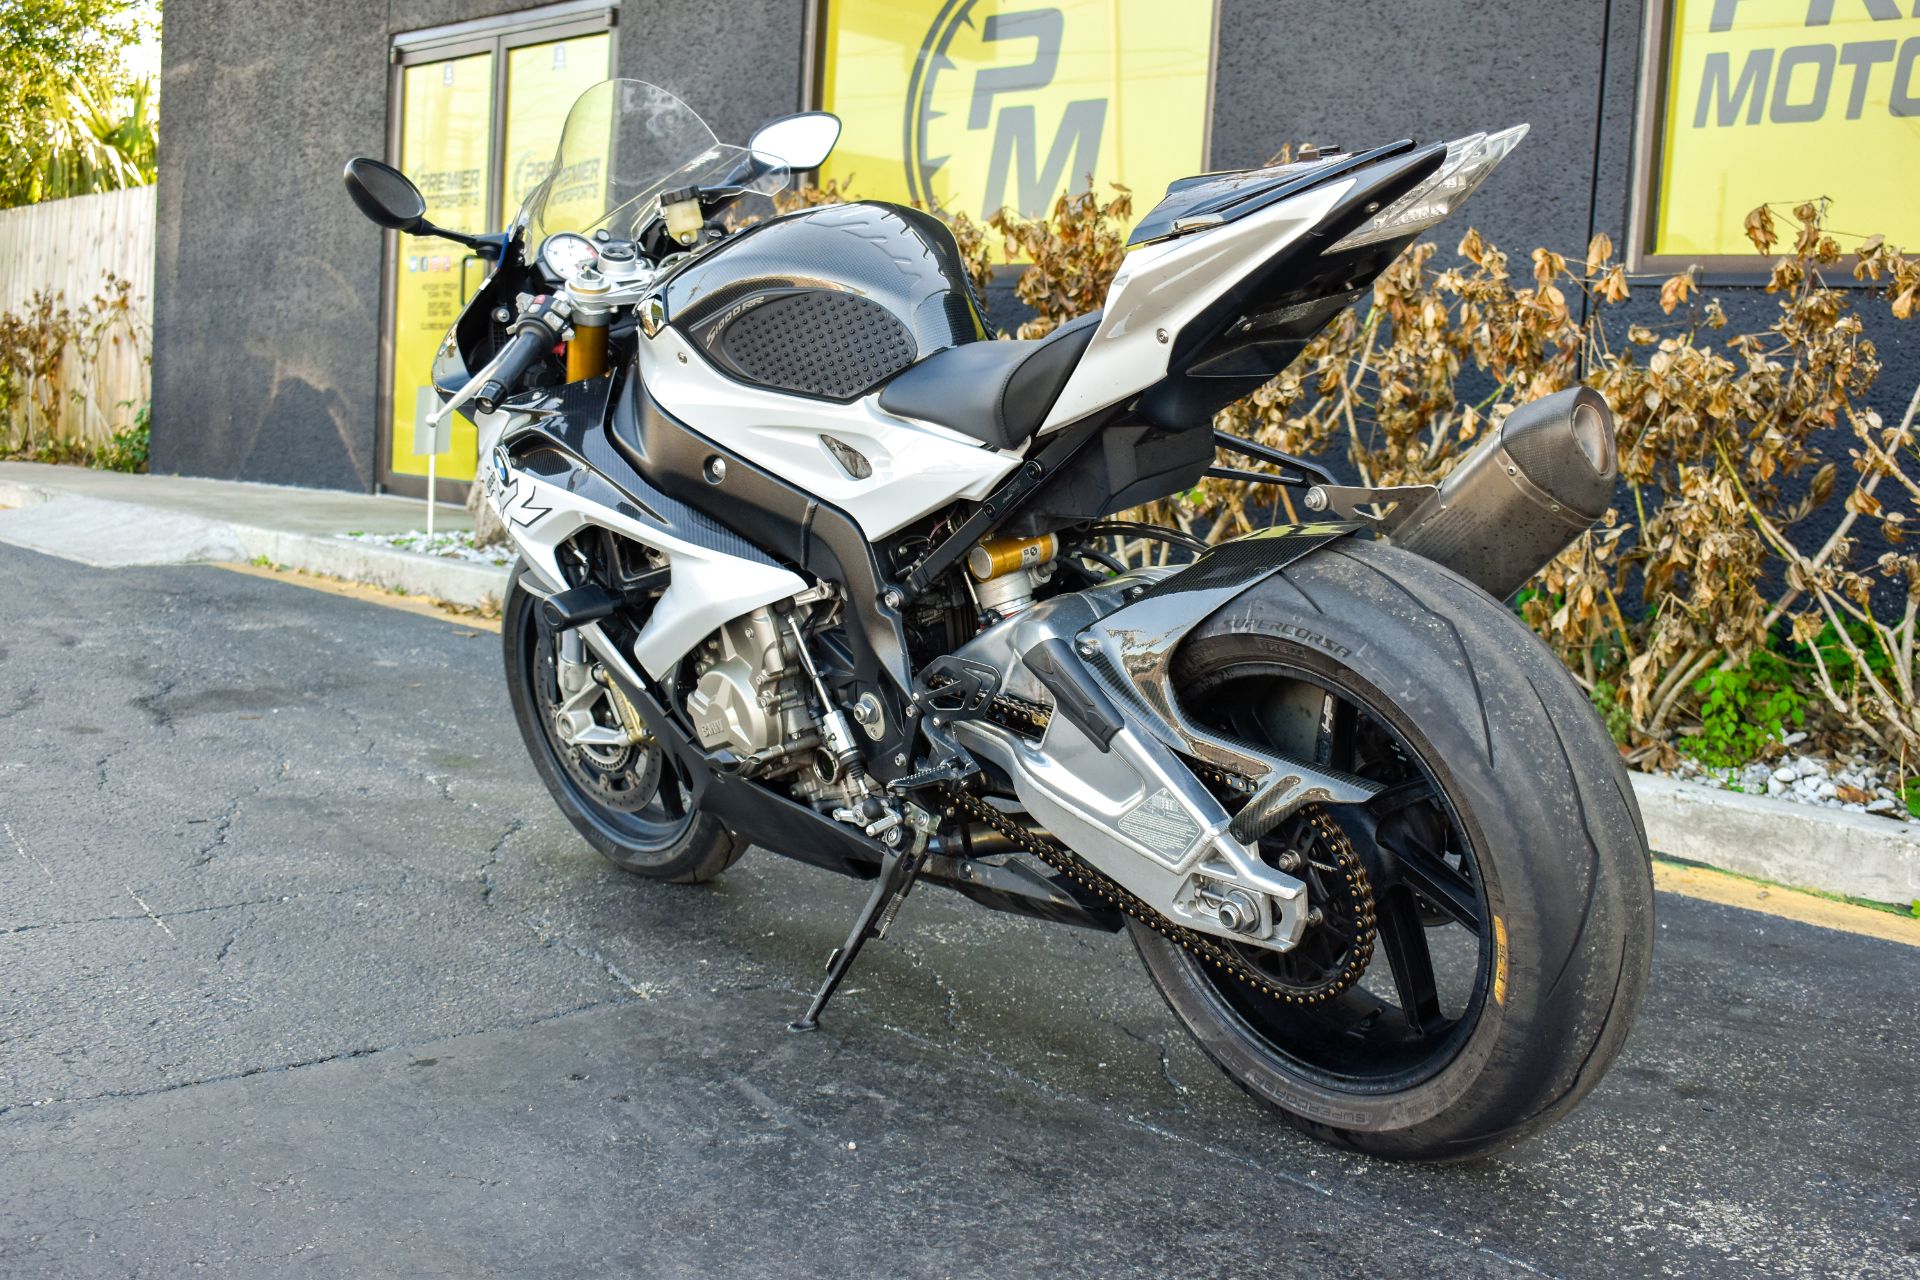 2015 BMW S 1000 RR in Jacksonville, Florida - Photo 16